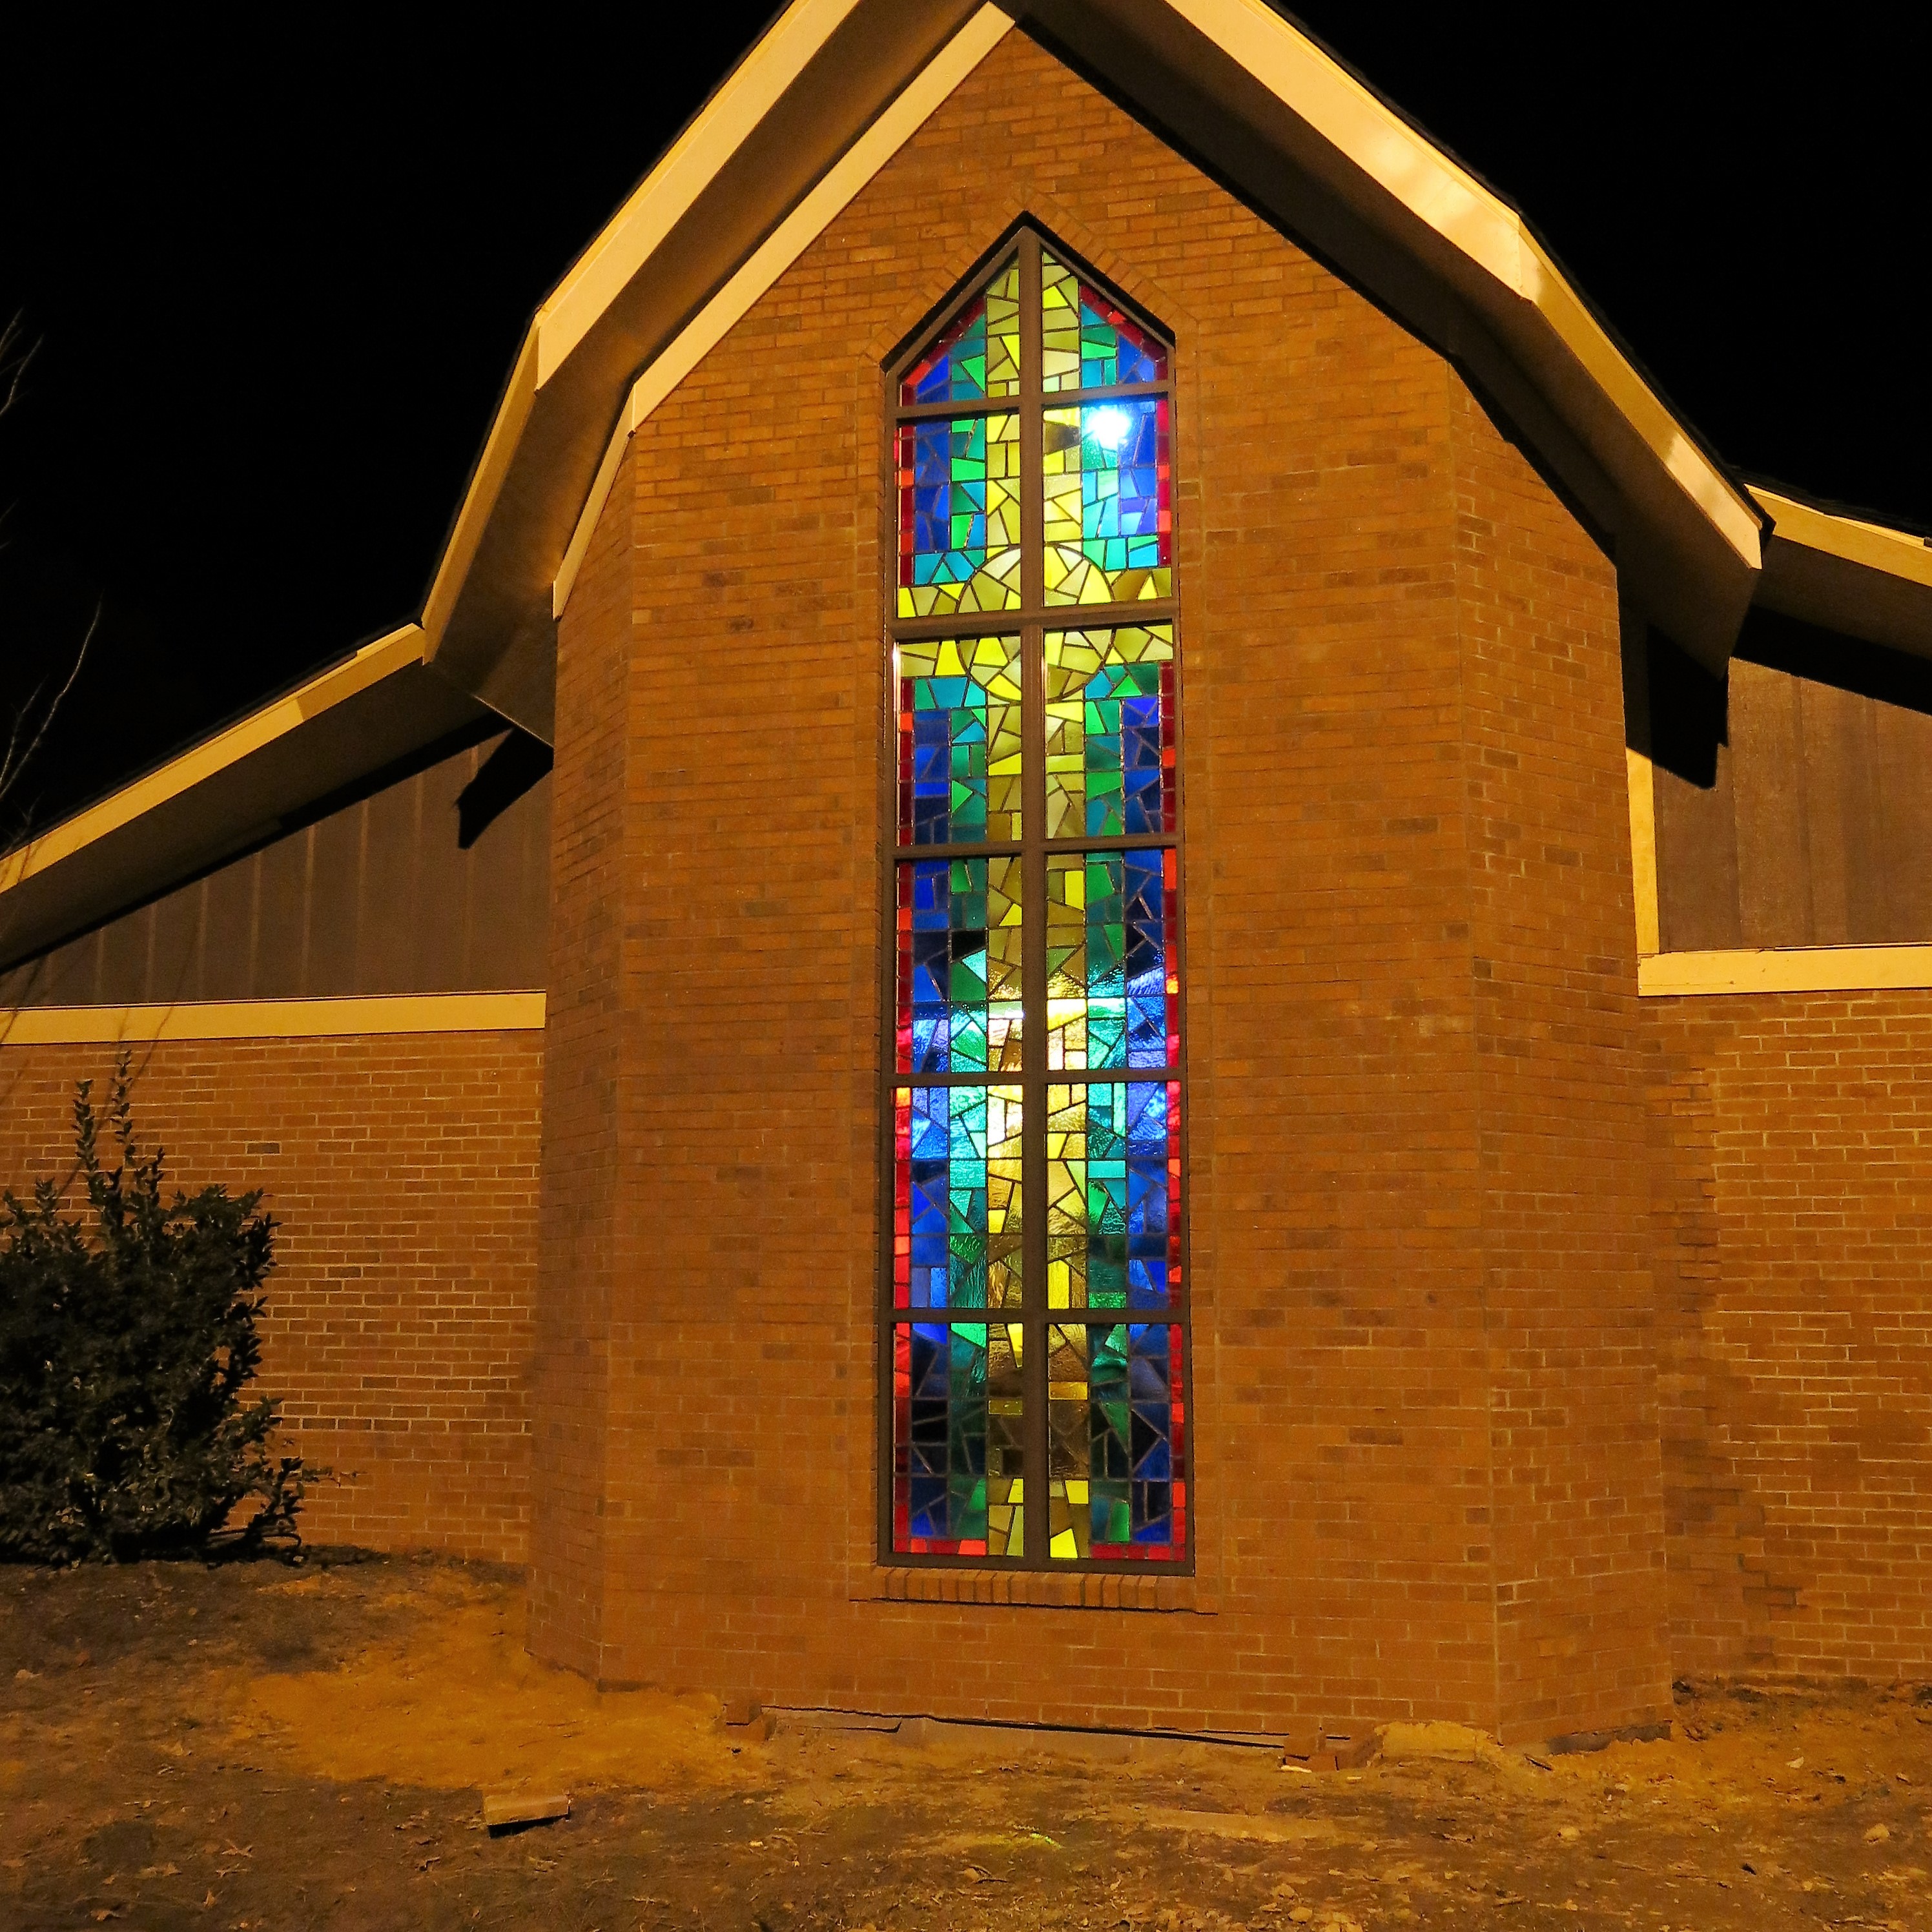 075, The New Apse at the moment of completion, 10pm, Dec 23, 2012